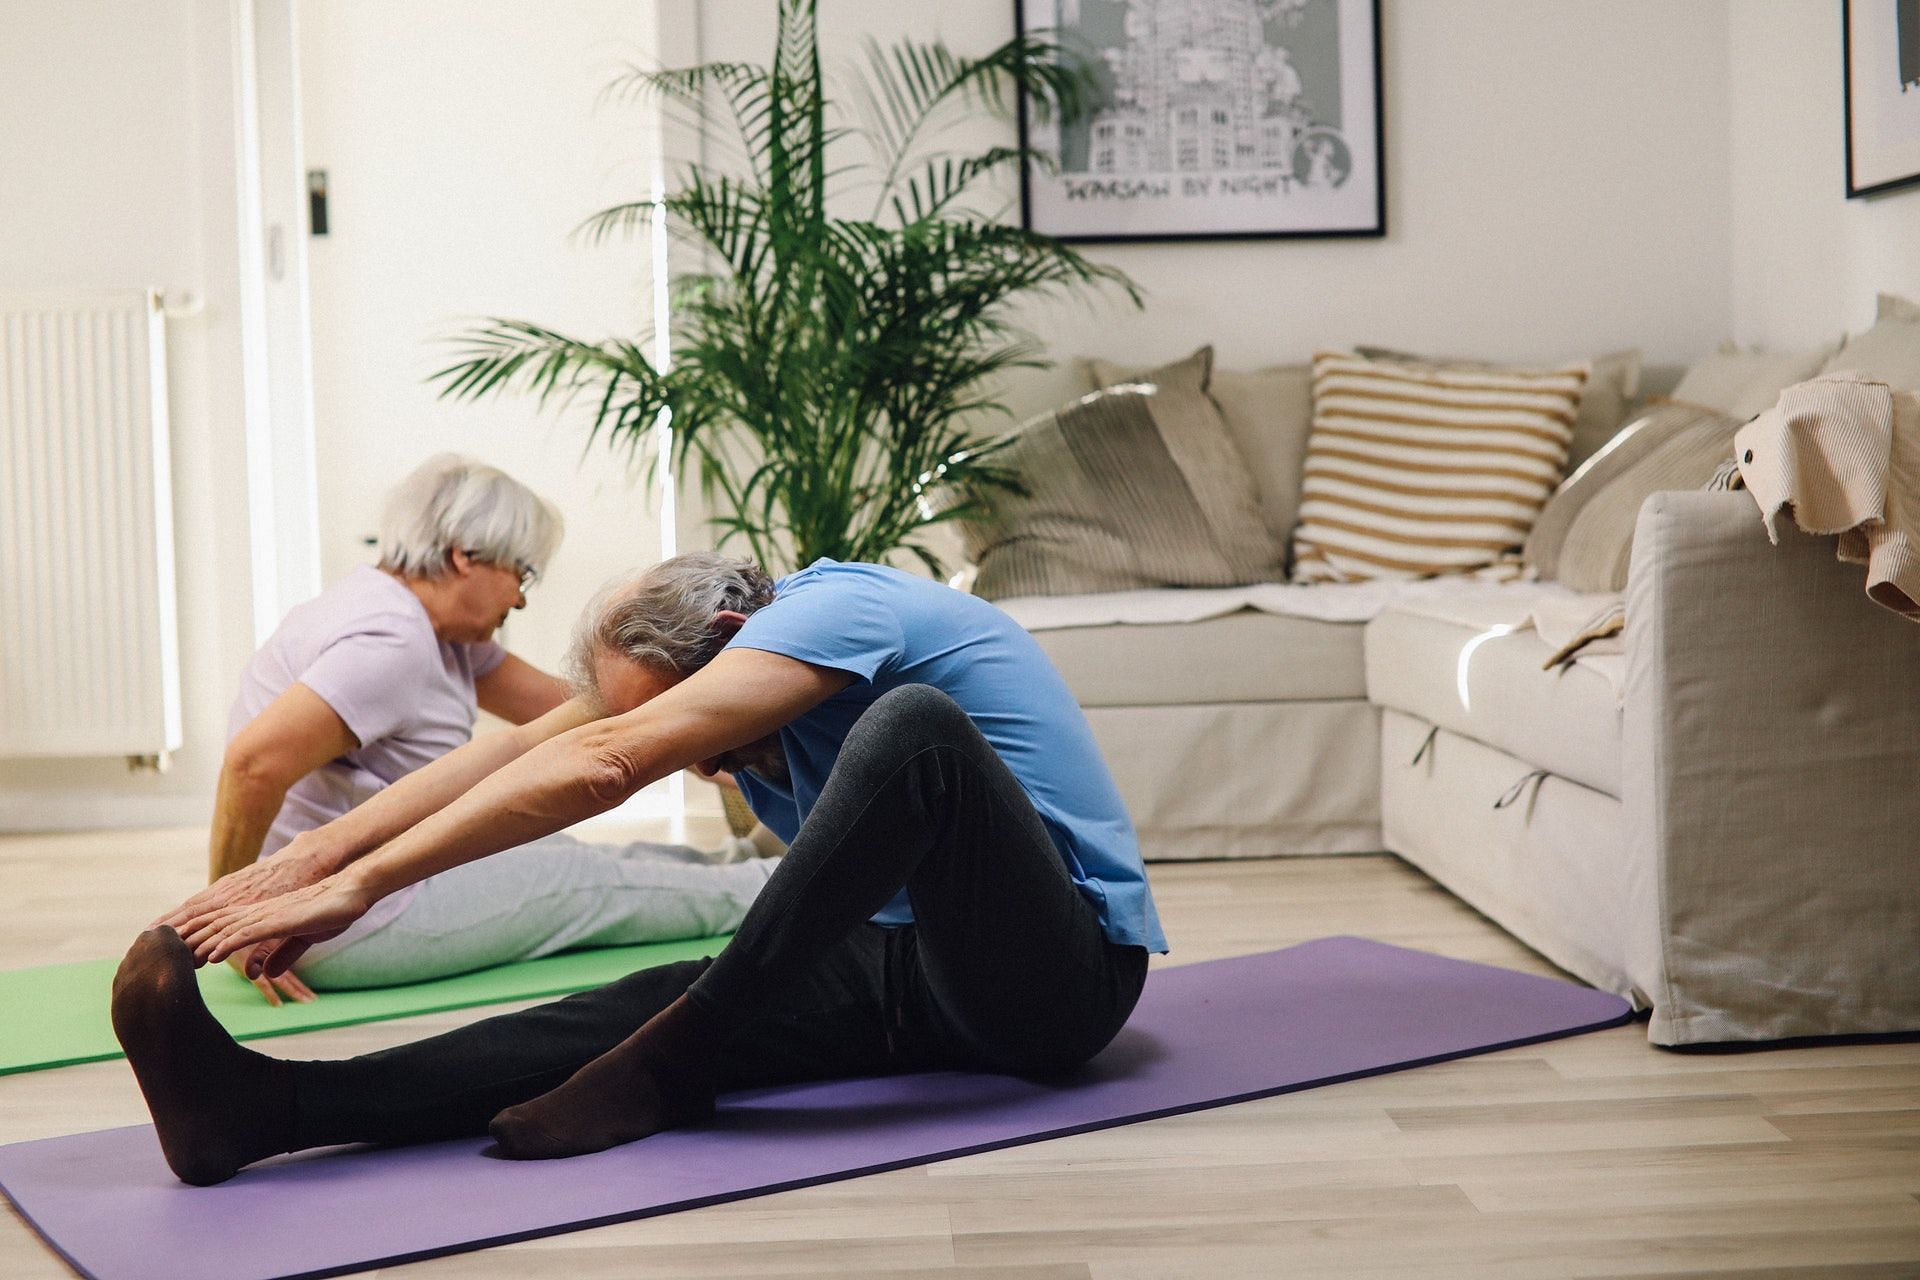 Keeping legs strong and flexible are important for the elderly. (Photo by A Koolshooter via pexels)